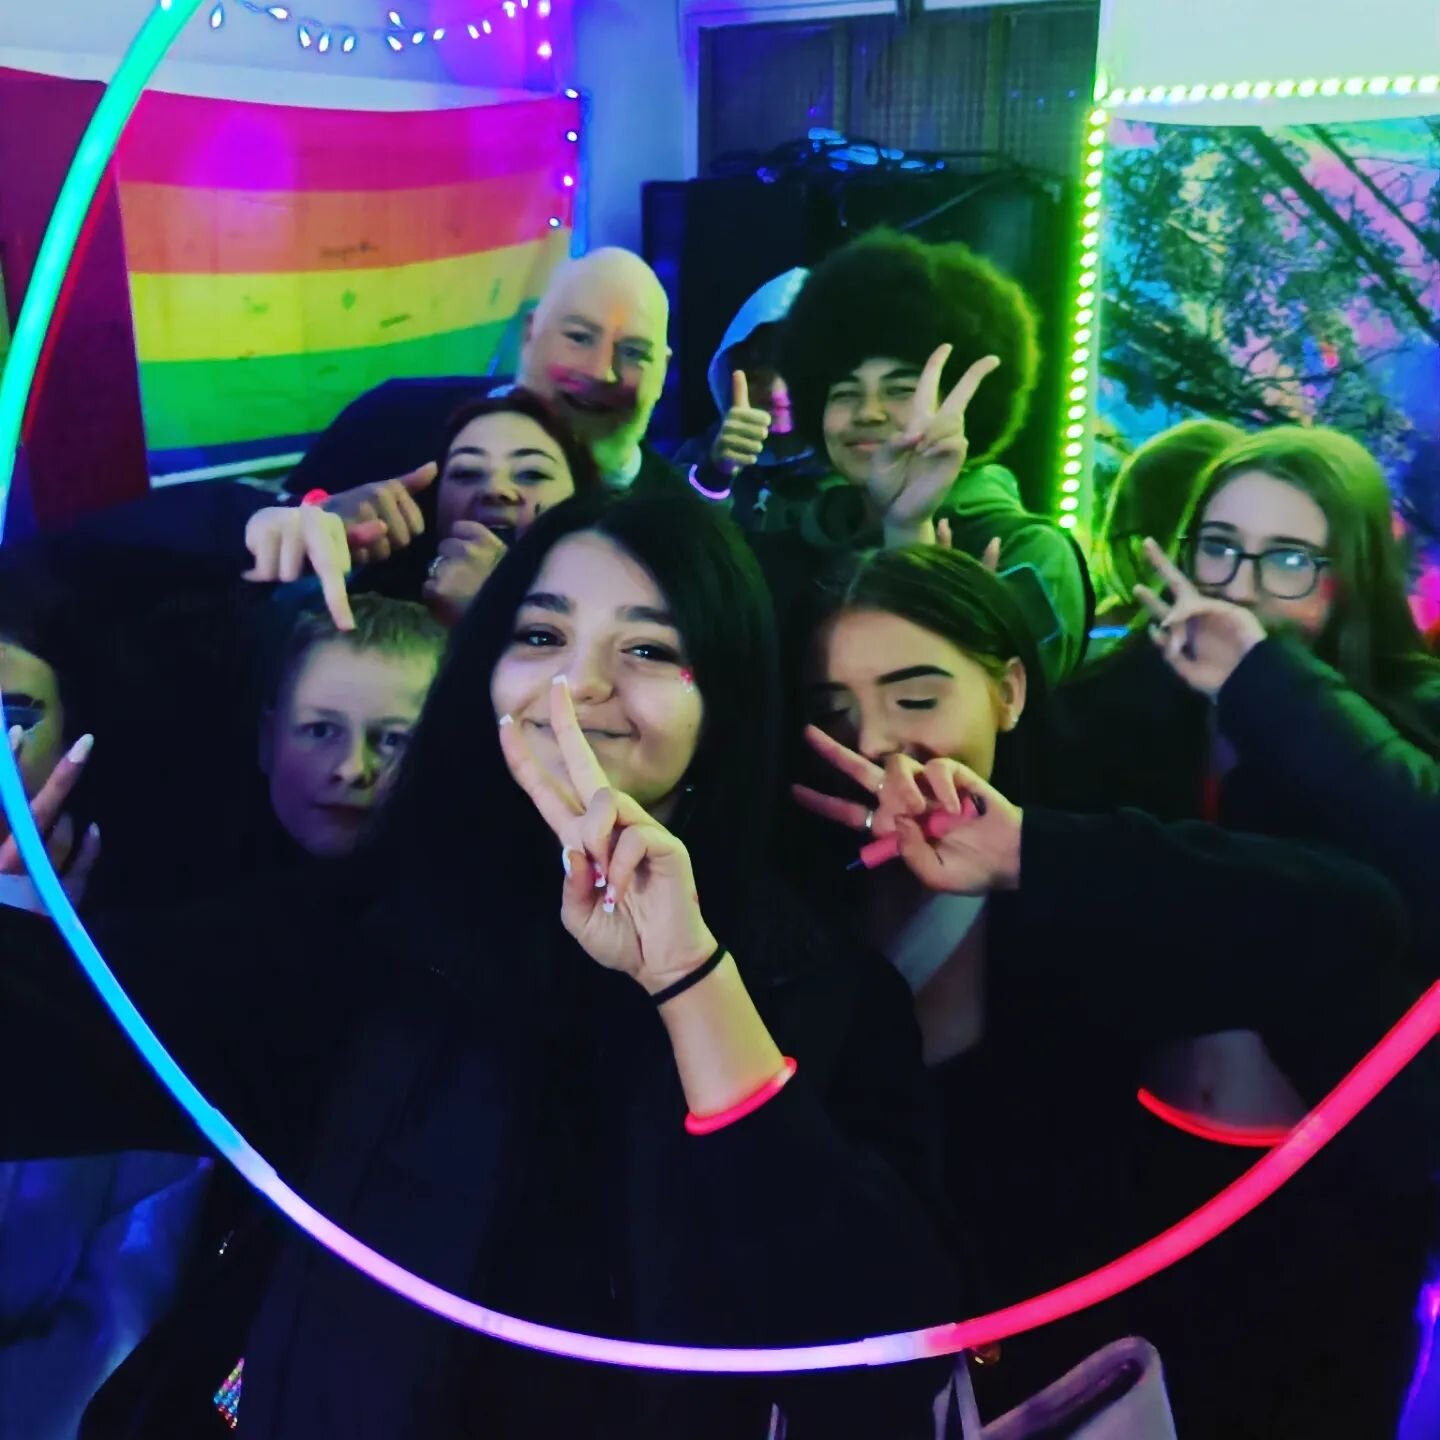 🥳 We partied like it was 1999 at our rave last night! SO. MUCH. FUN. 

🤩 Thanks to all the young people who came along and brought the good vibes with you. Thanks to our young chefs, Dani and Oliwier for the yummy pizzas. Thanks also to our lovely,